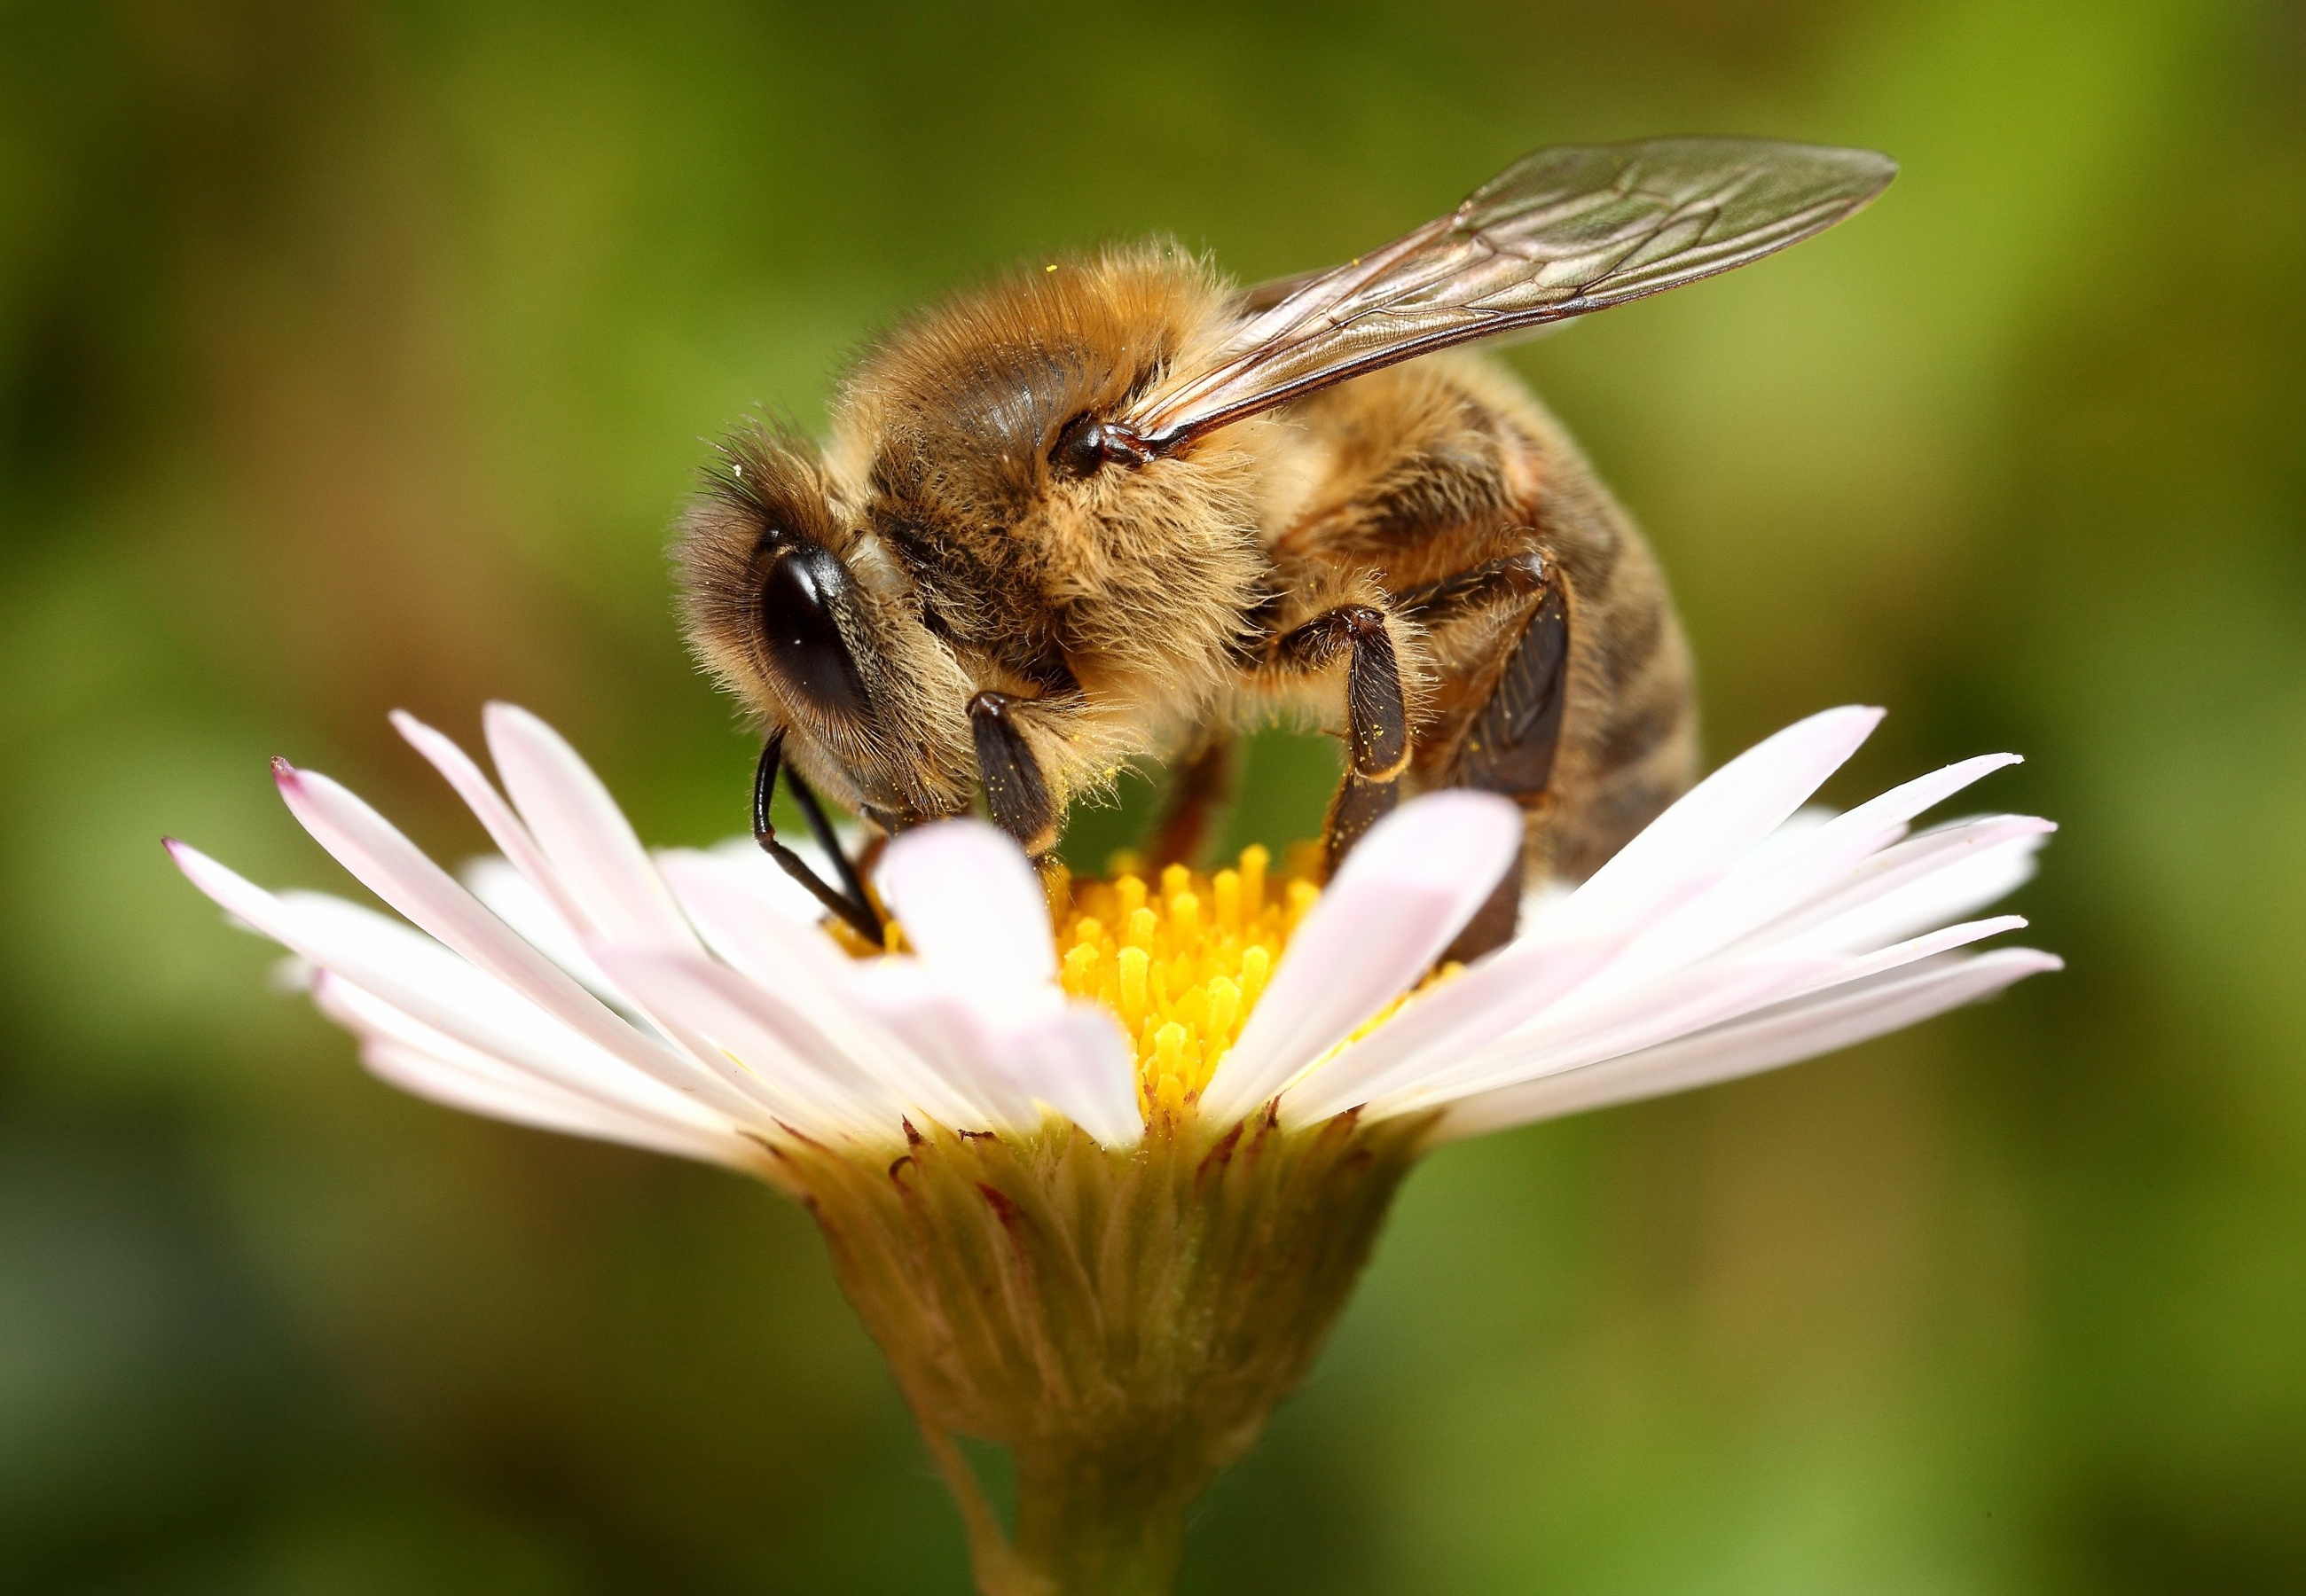 125036 Screensavers and Wallpapers Bee for phone. Download background, flower, macro, bee pictures for free